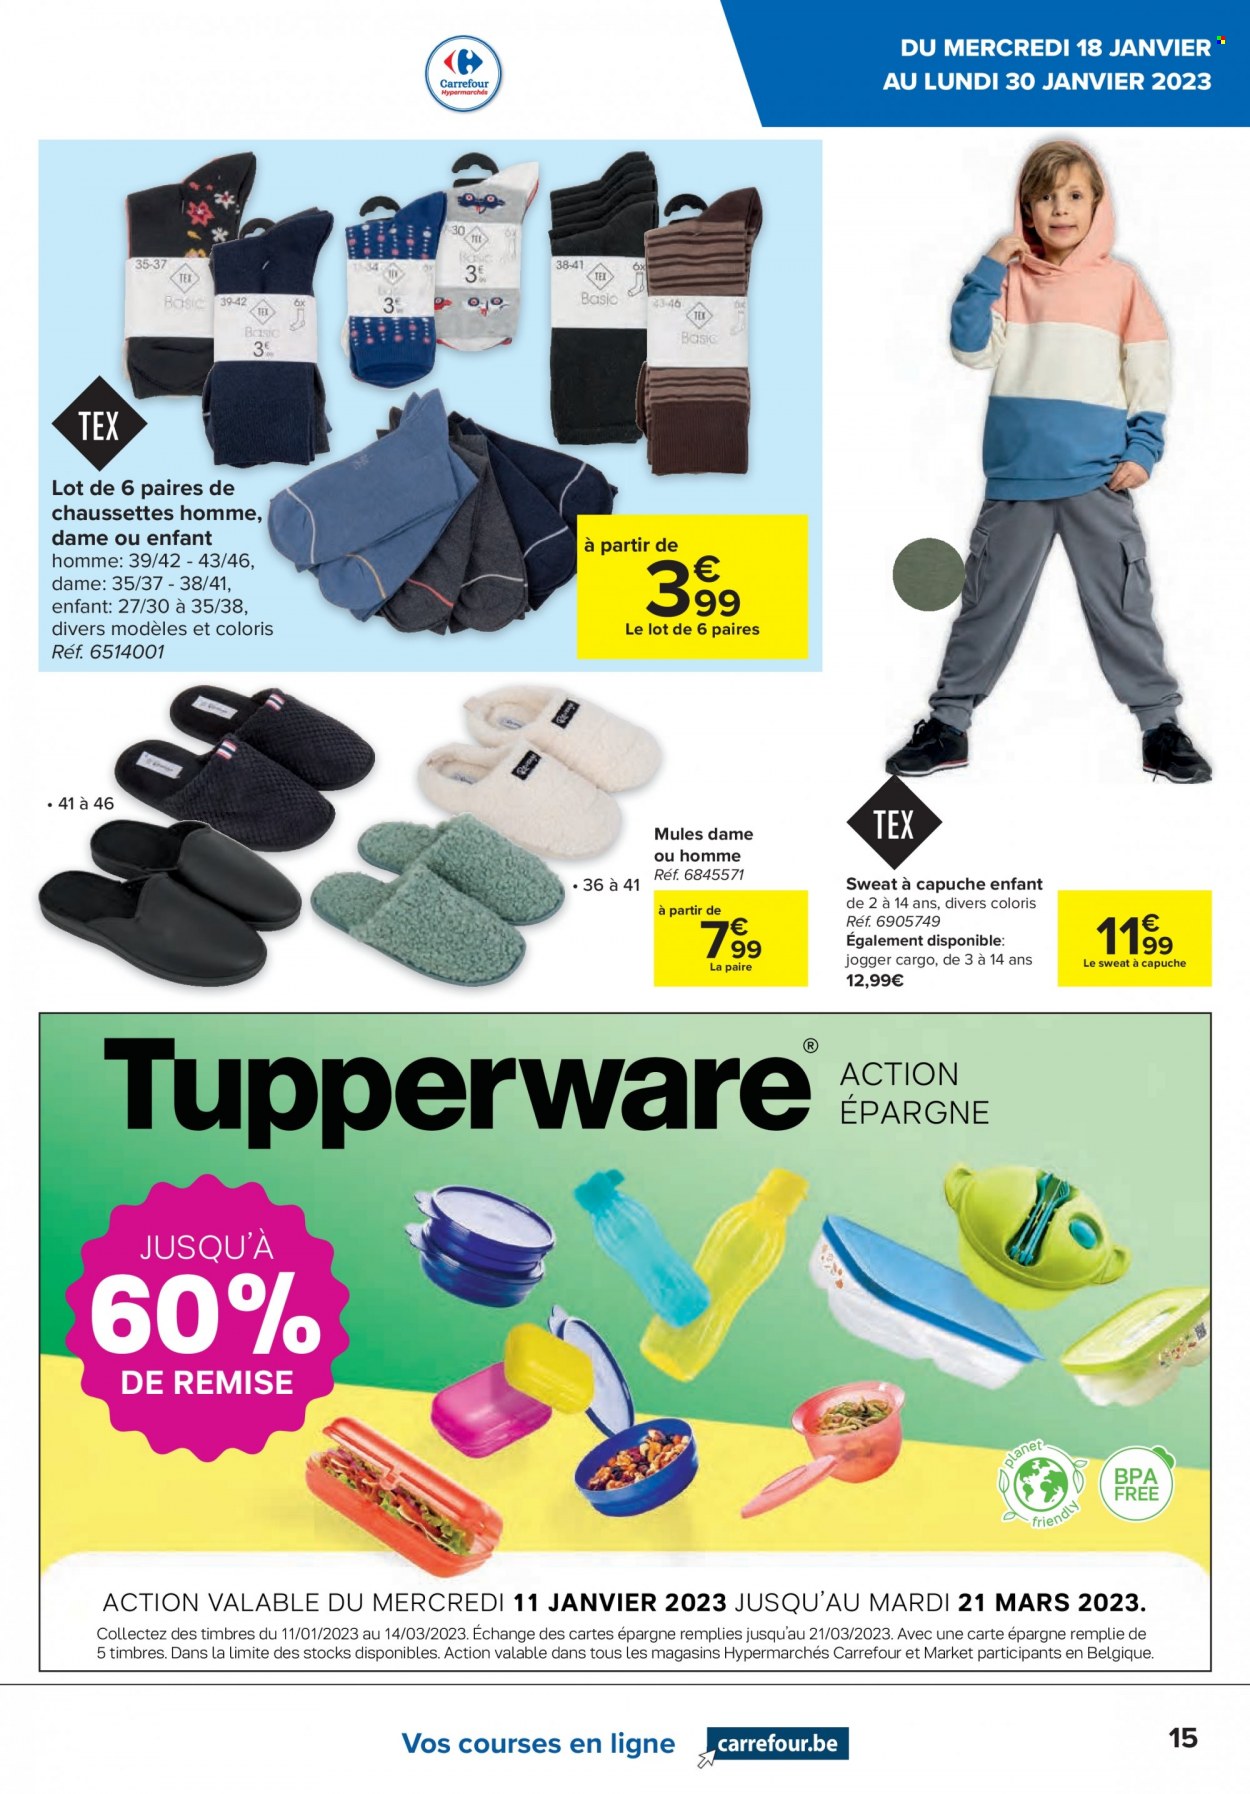 Catalogue Carrefour hypermarkt - 18.1.2023 - 30.1.2023. Page 15.